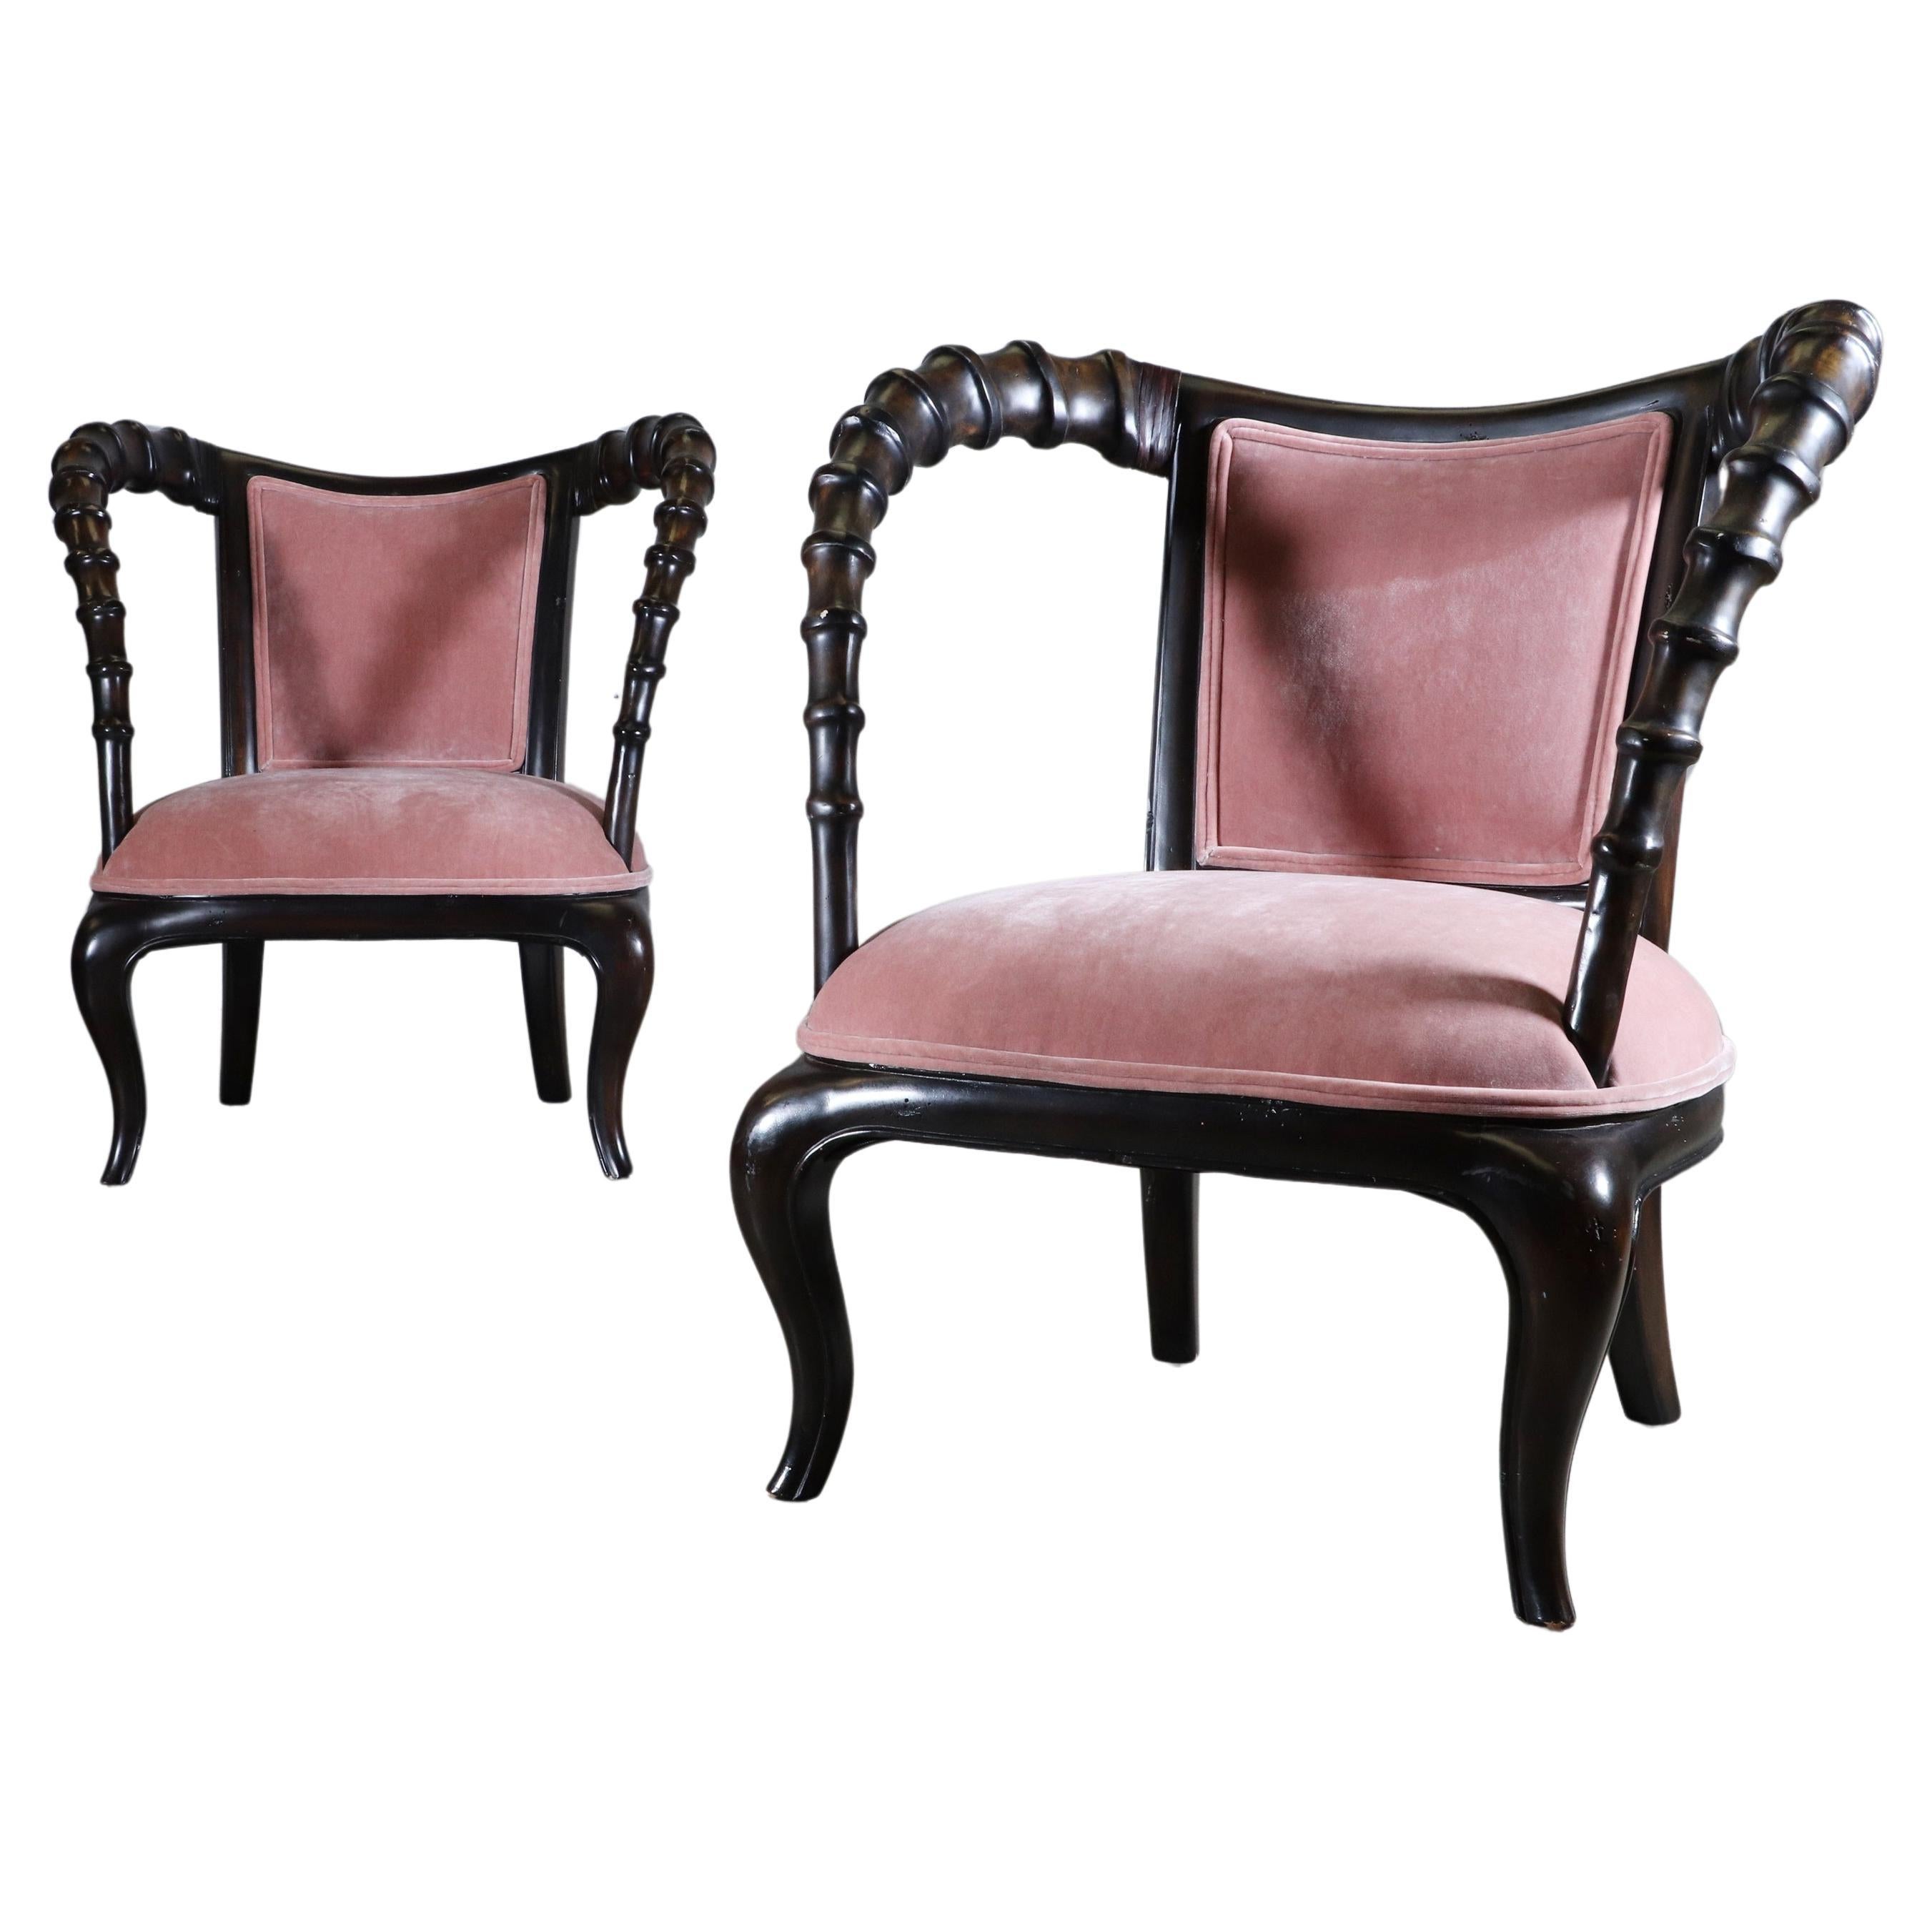 Colonial Revival Armchairs